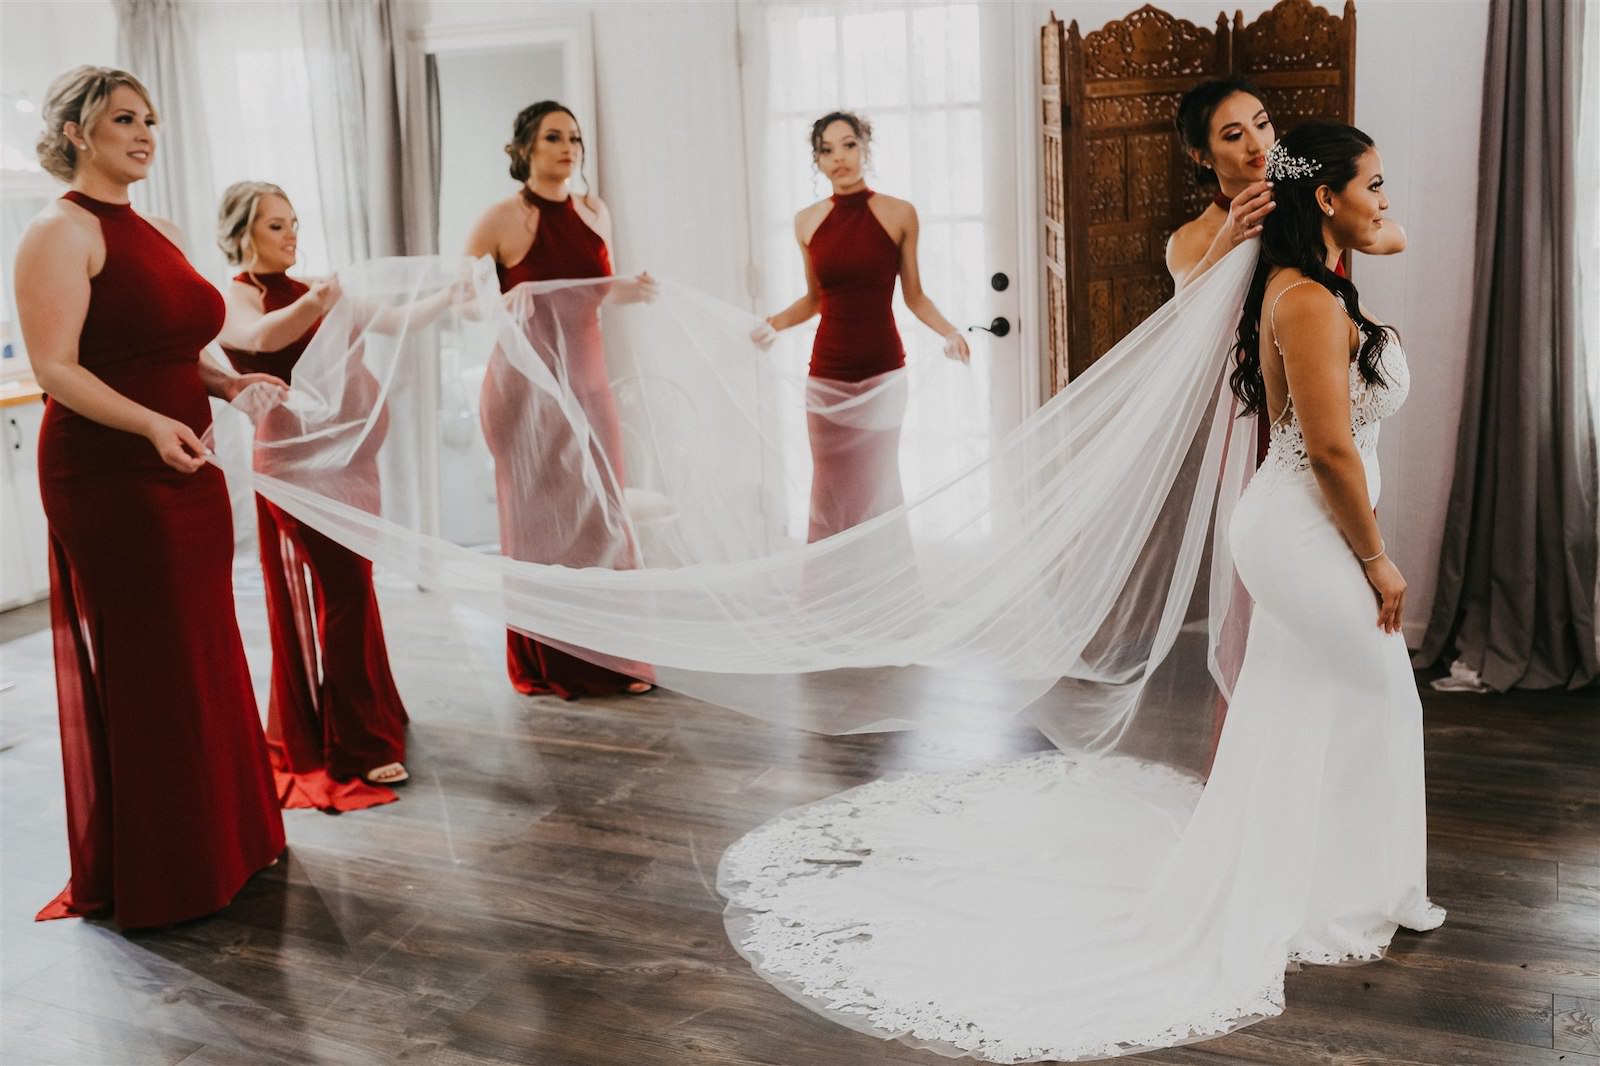 Bridesmaids Helping Bride Get Ready Shot | Femme Akoi Beauty Studio Wedding Hair and Makeup | Enzoani Lace Mermaid Low Back Spaghetti Strap Dress with Cathedral Veil | Burgundy Maroon Deep Red Chiffon Bridesmaid Dresses